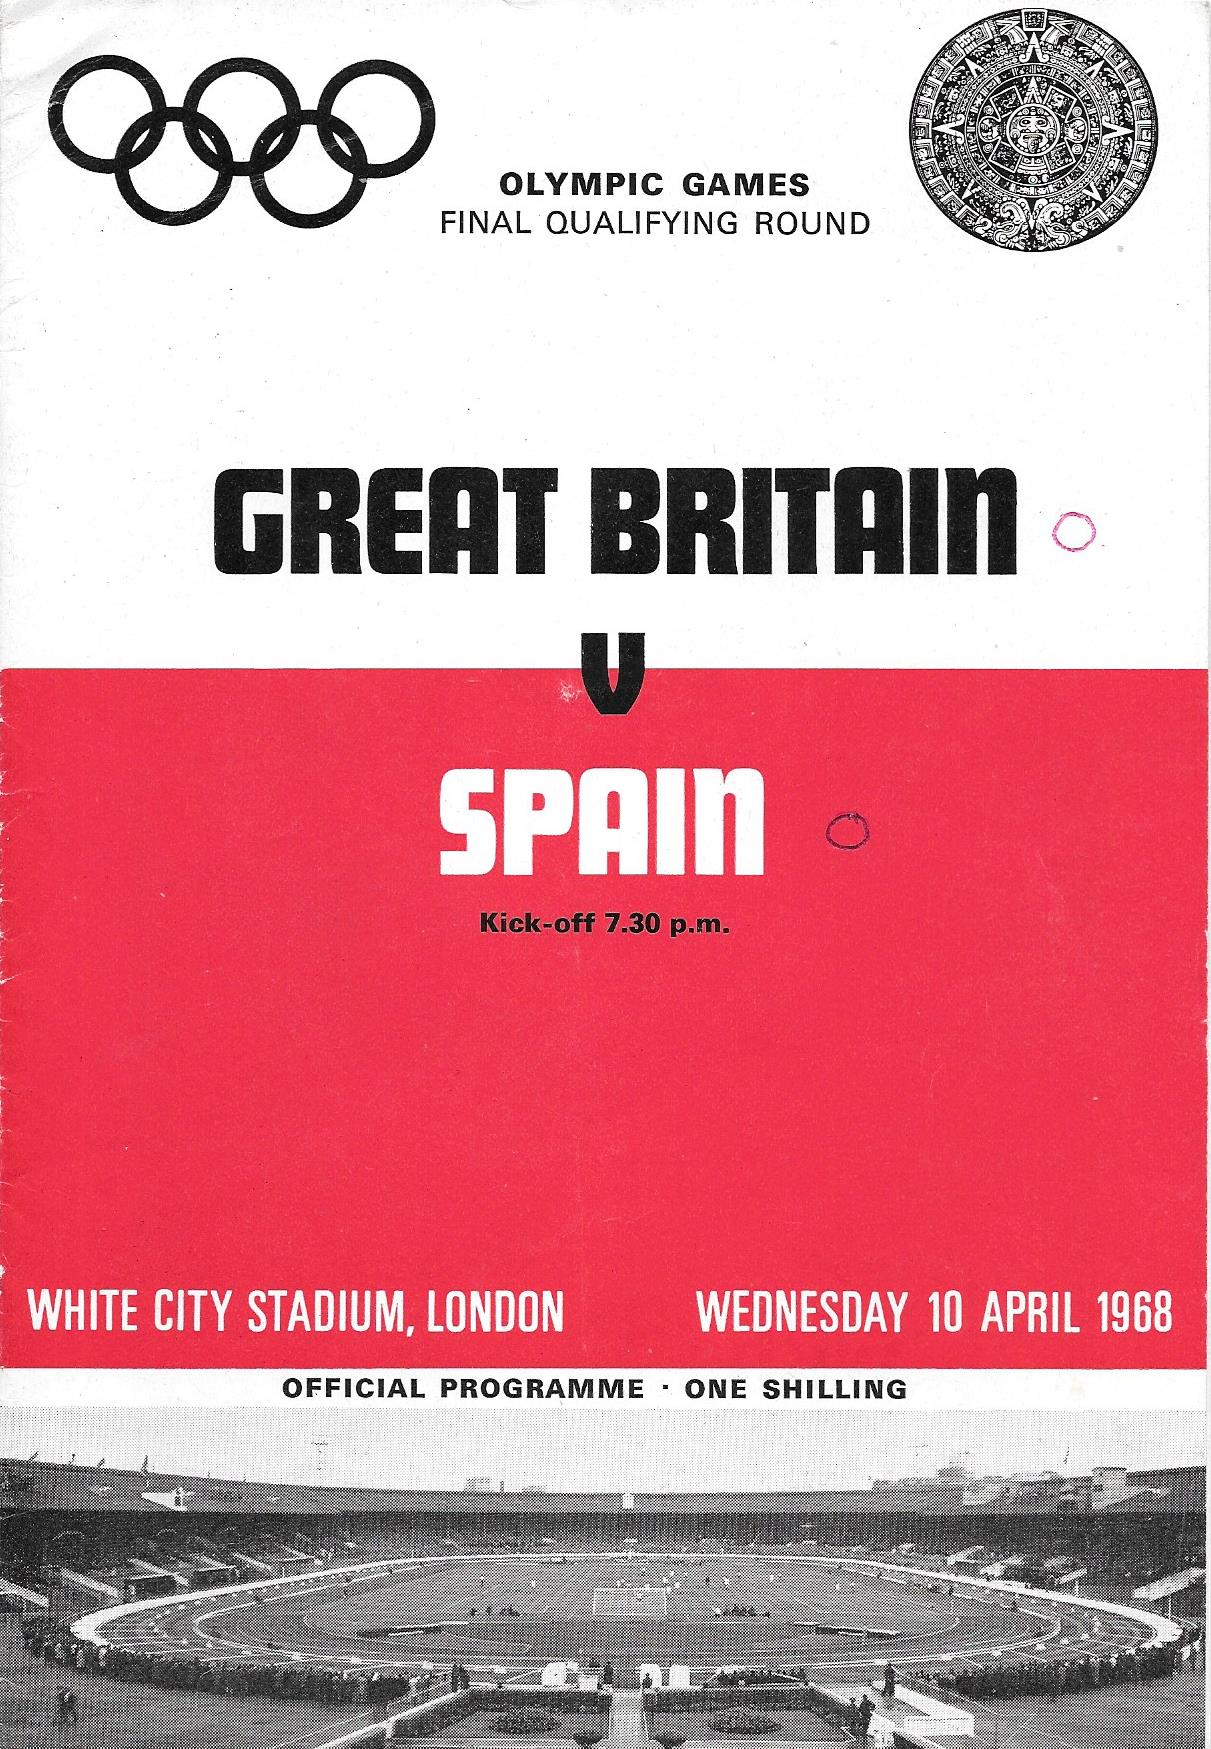 1968 GREAT BRITAIN V SPAIN OLYMPIC GAMES FOOTBALL QUALIFIER AT WHITE CITY